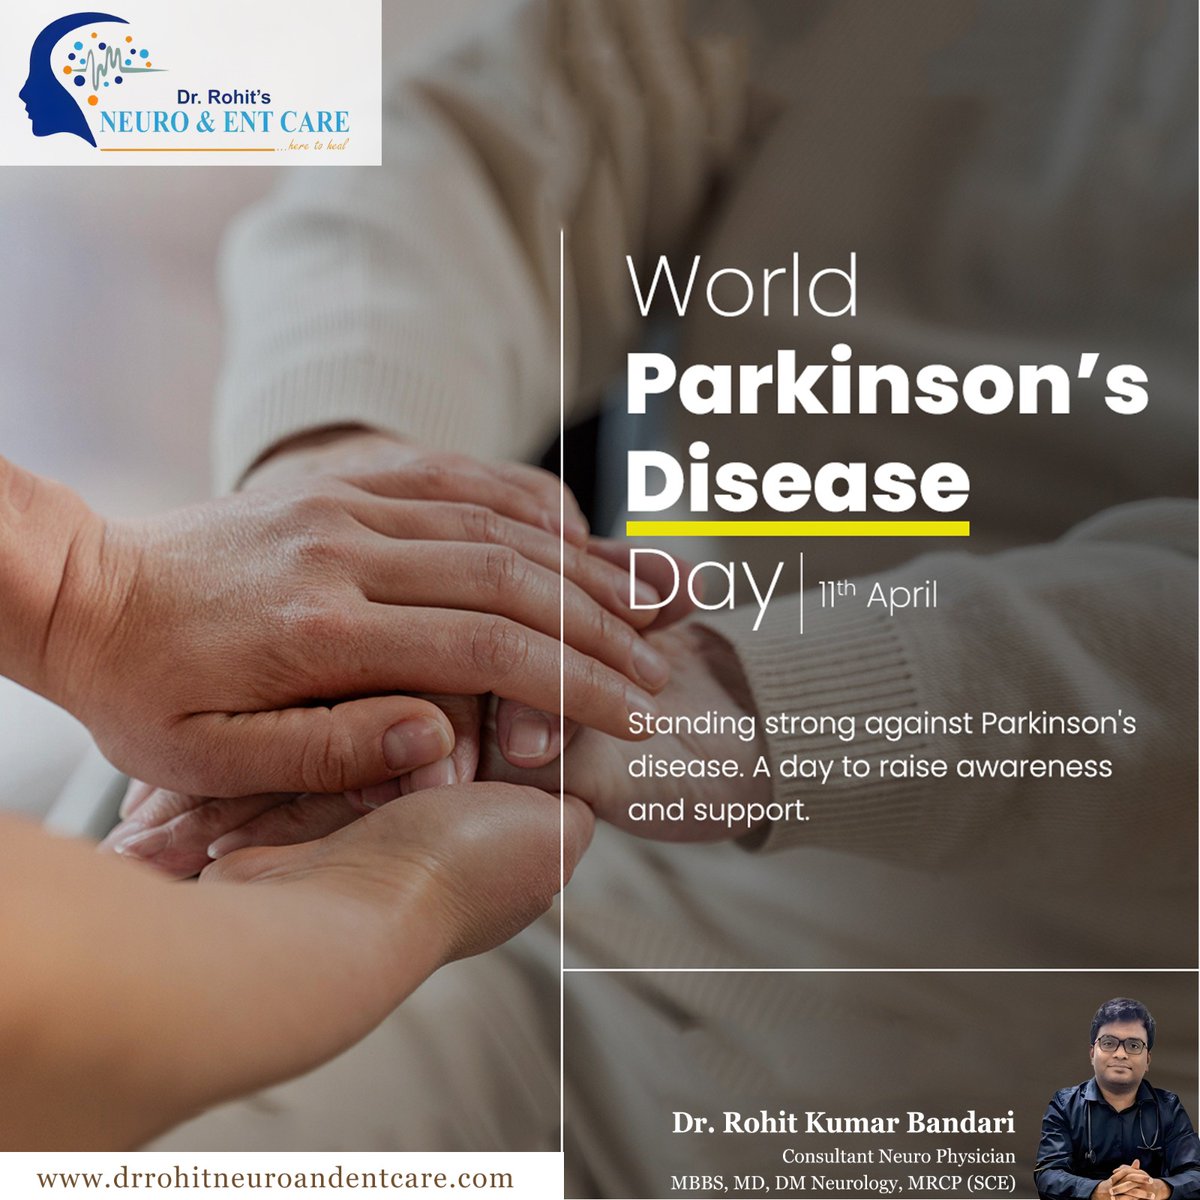 World Parkinson's Disease Day.
Stand strong against Parkinson's Disease a day to raise awareness and support.

#ParkinsonsAwareness #UniteForParkinsons #ParkinsonsFight #Move4PD #ParkinsonsCommunity #EndParkinsons #PDWarrior #ShakeItOffParkinsons #ParkinsonsSupport